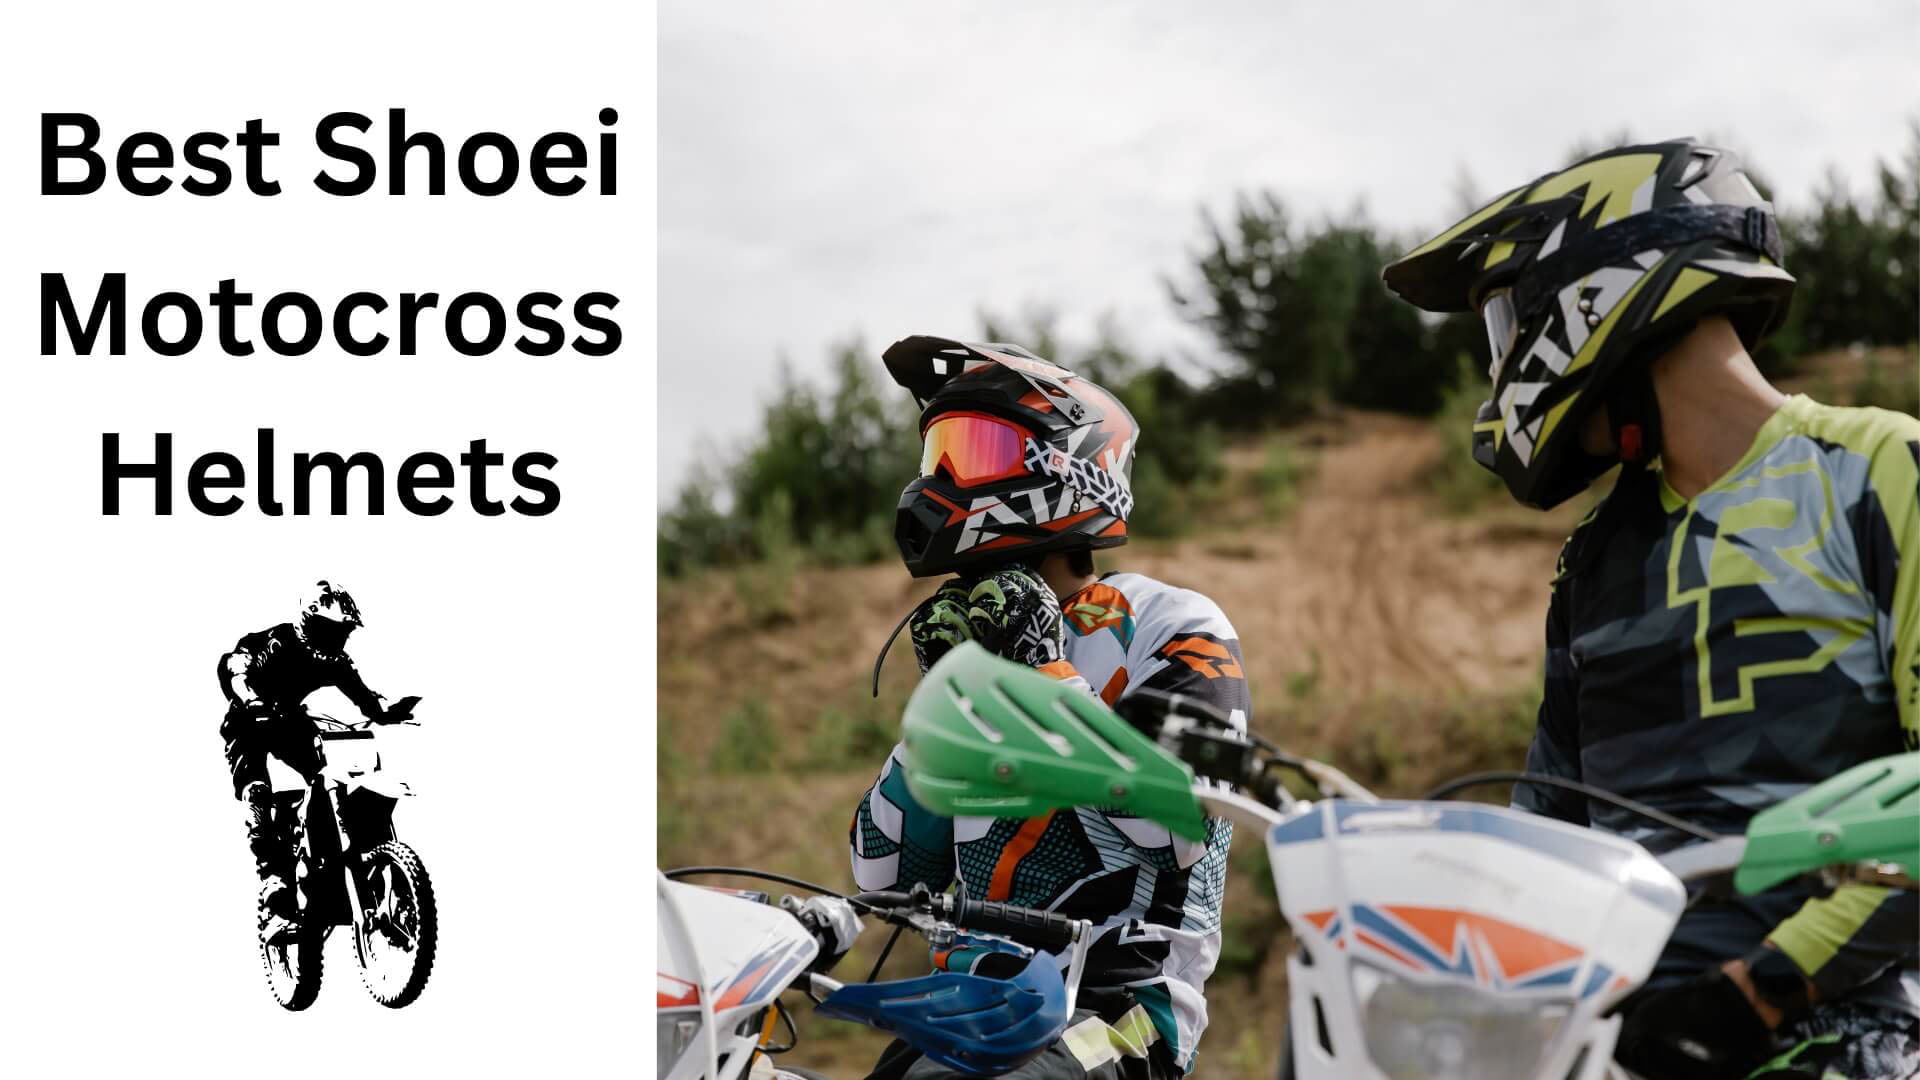 Shoei Motocross Helmets: What to Look for and Our Top Picks